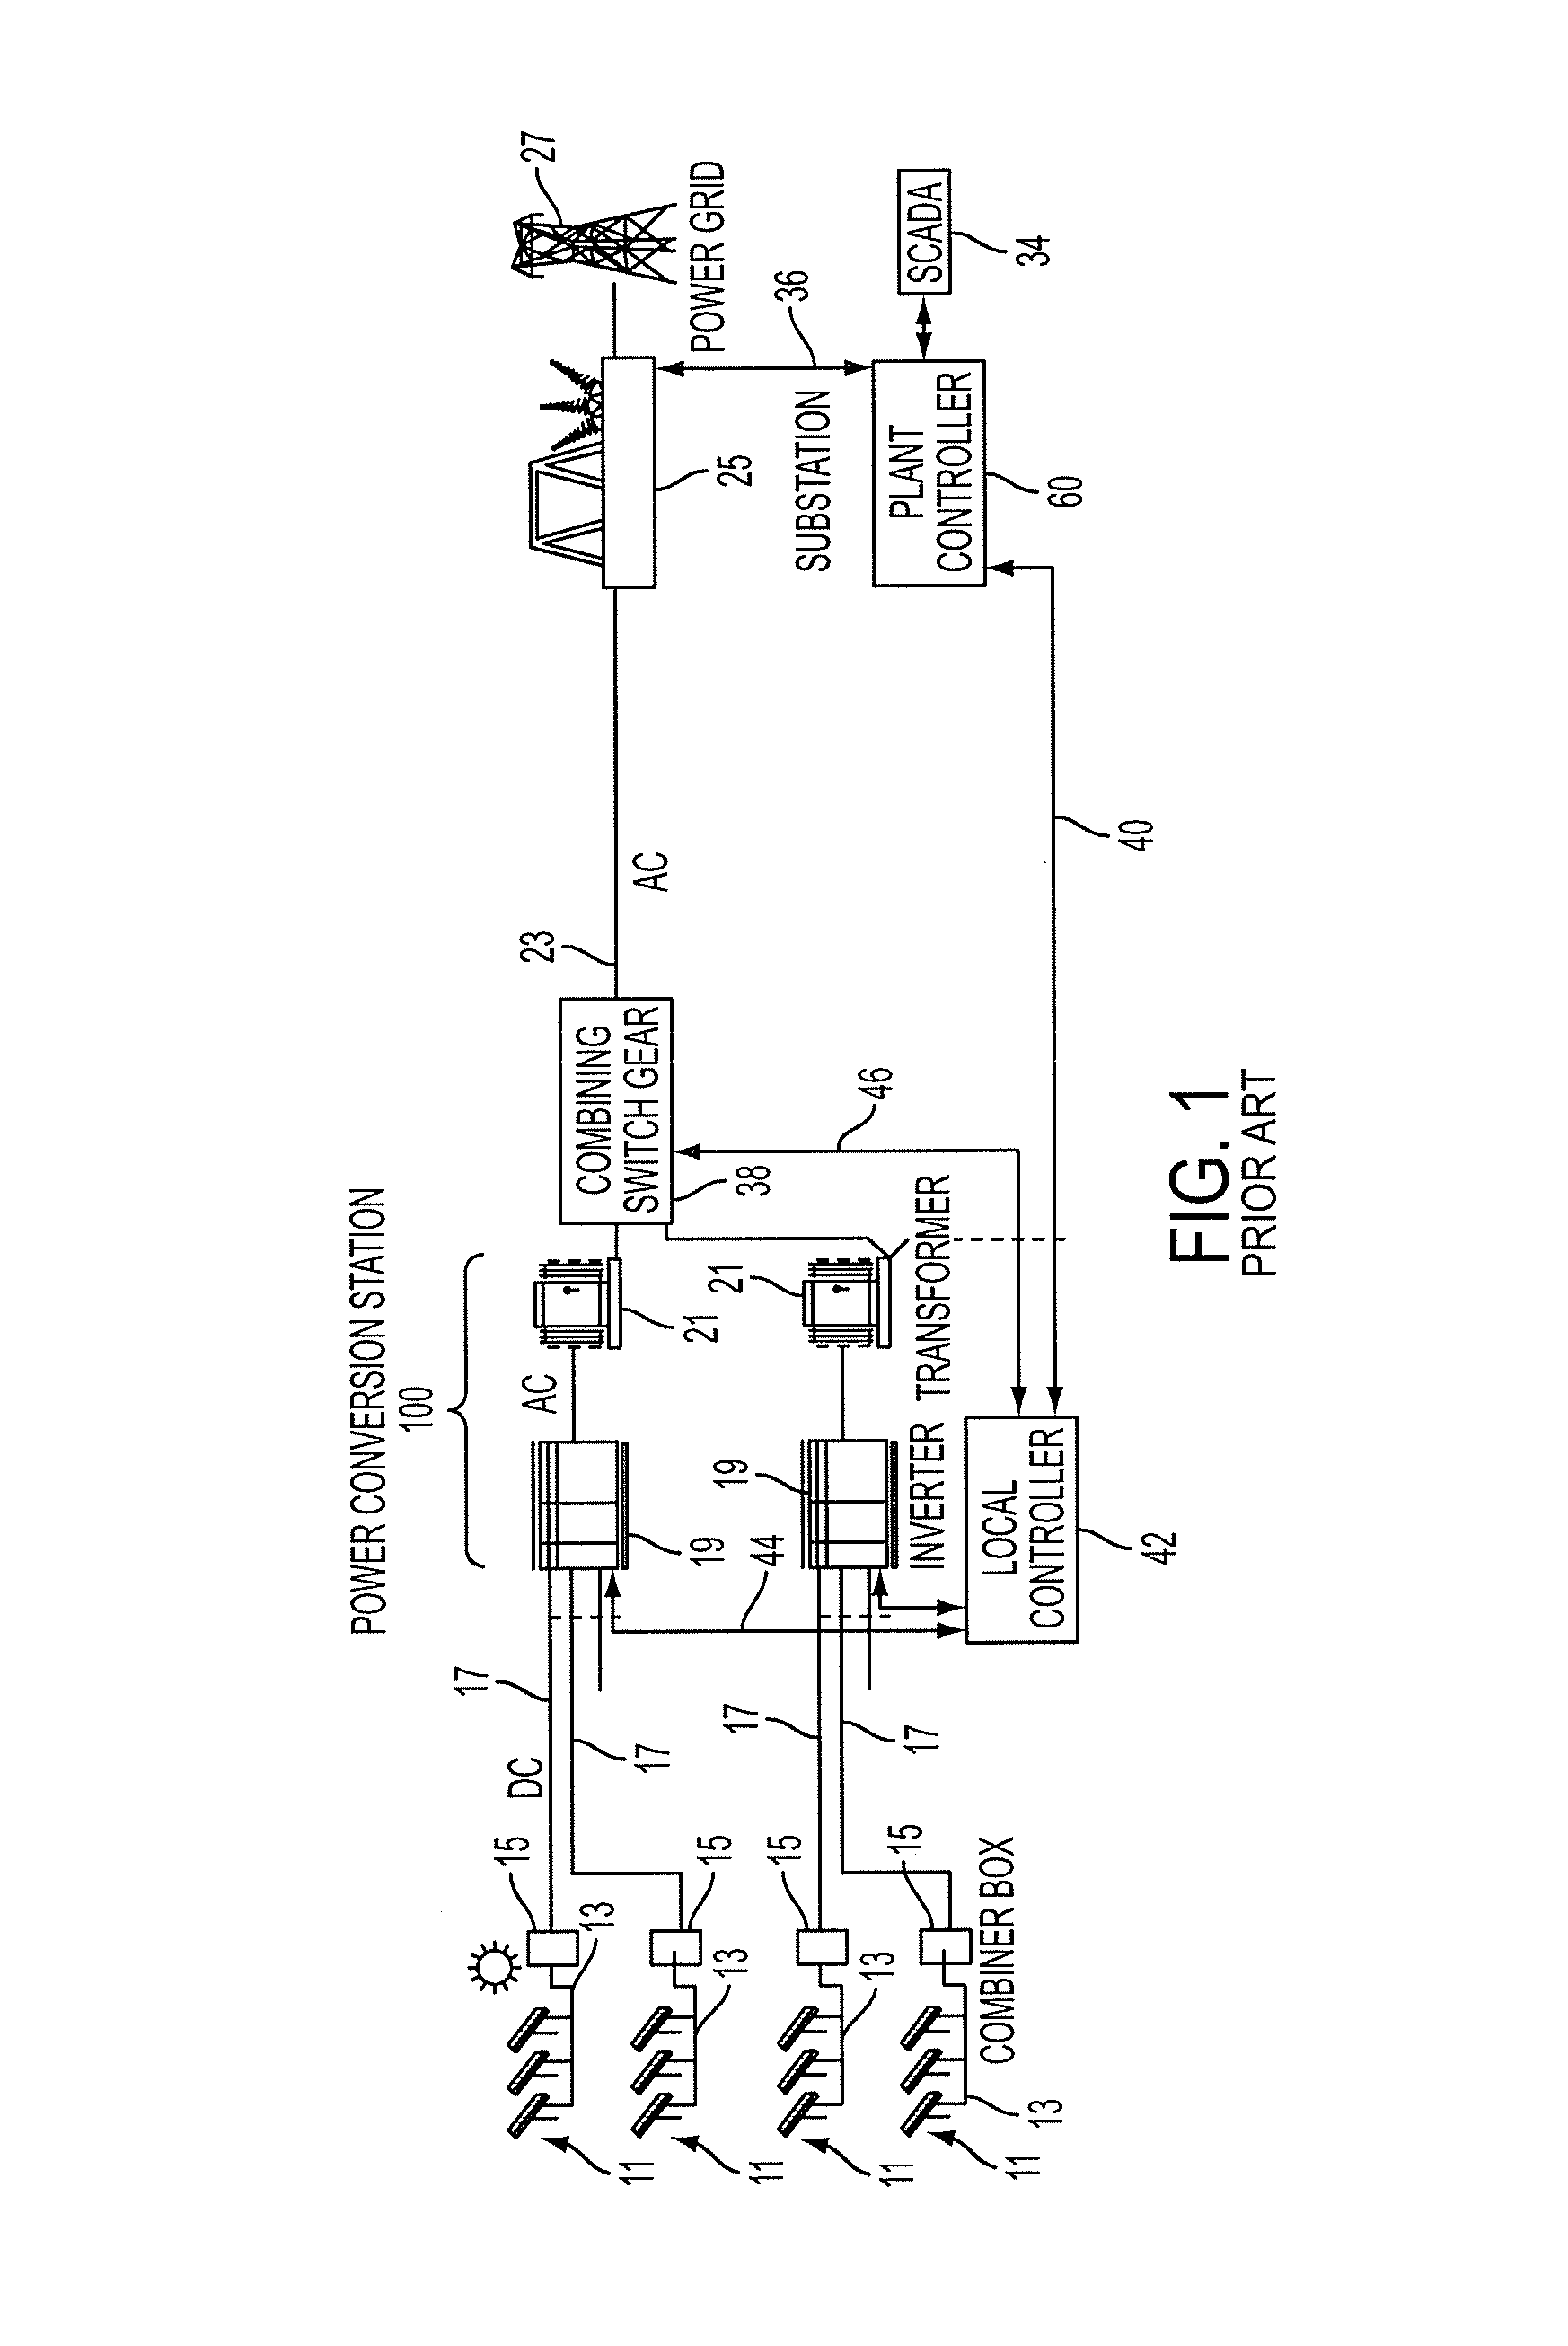 System for operation of photovoltaic power plant and DC power collection within